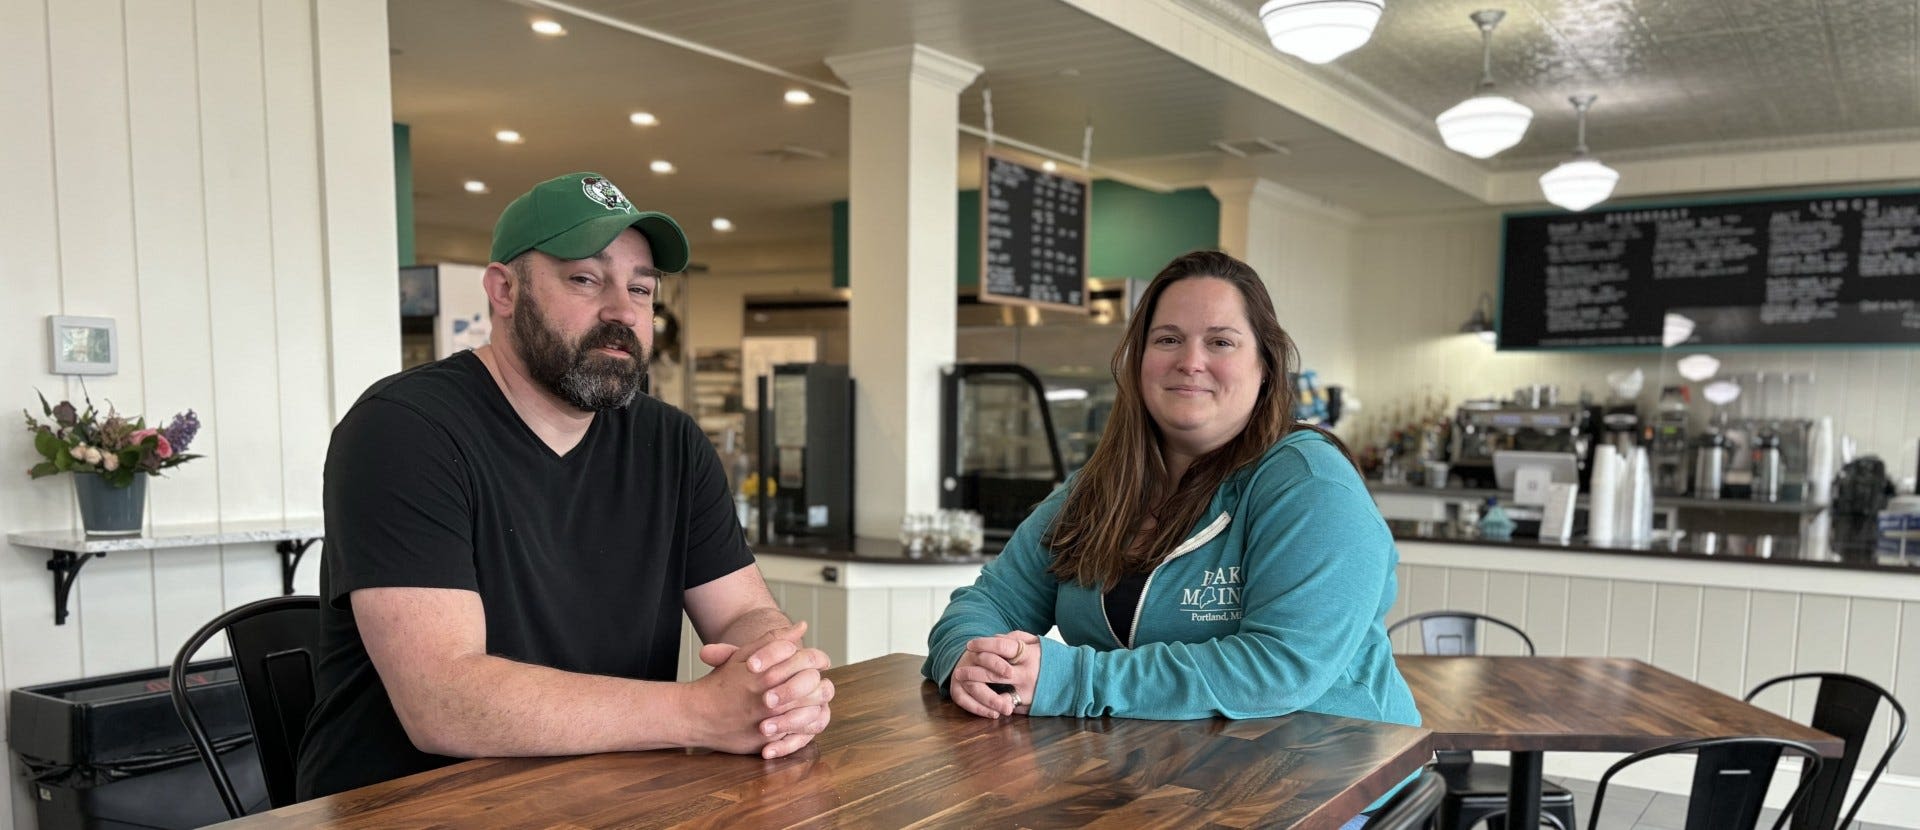 Bake Maine opens second location: Wells couple brings sweet and savory eats to hometown